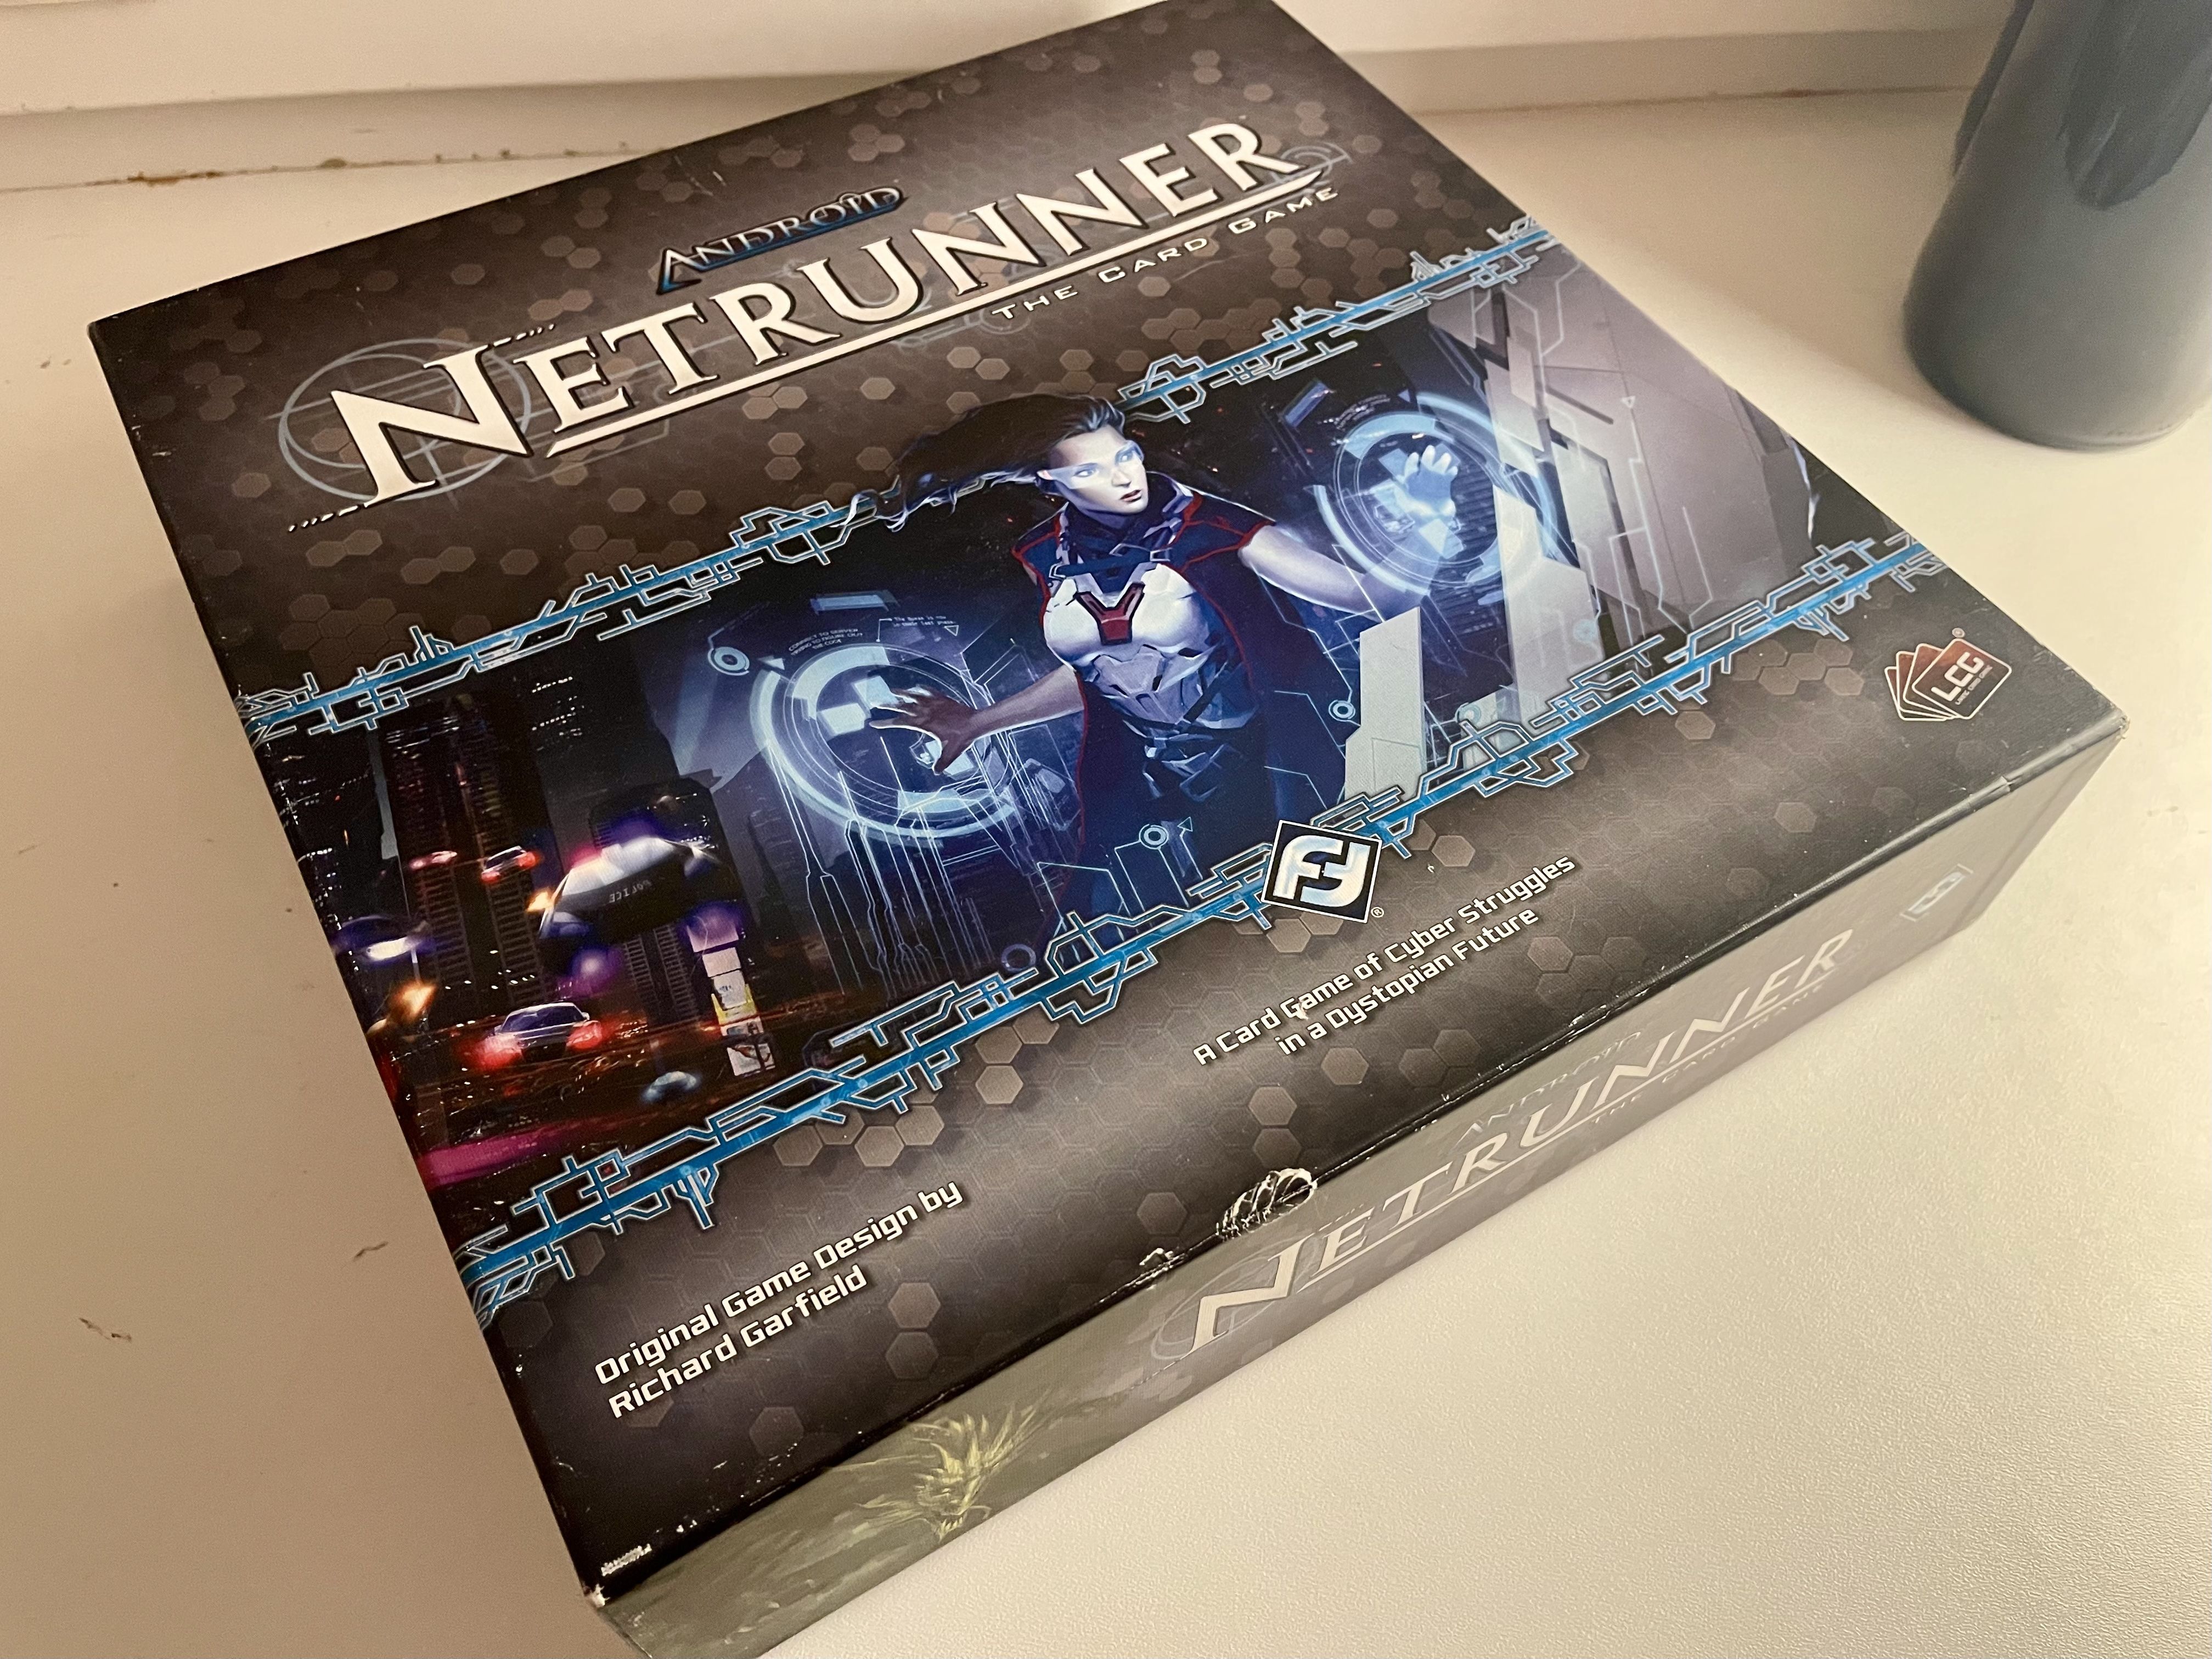 Product Details | Android: Netrunner | GeekMarket